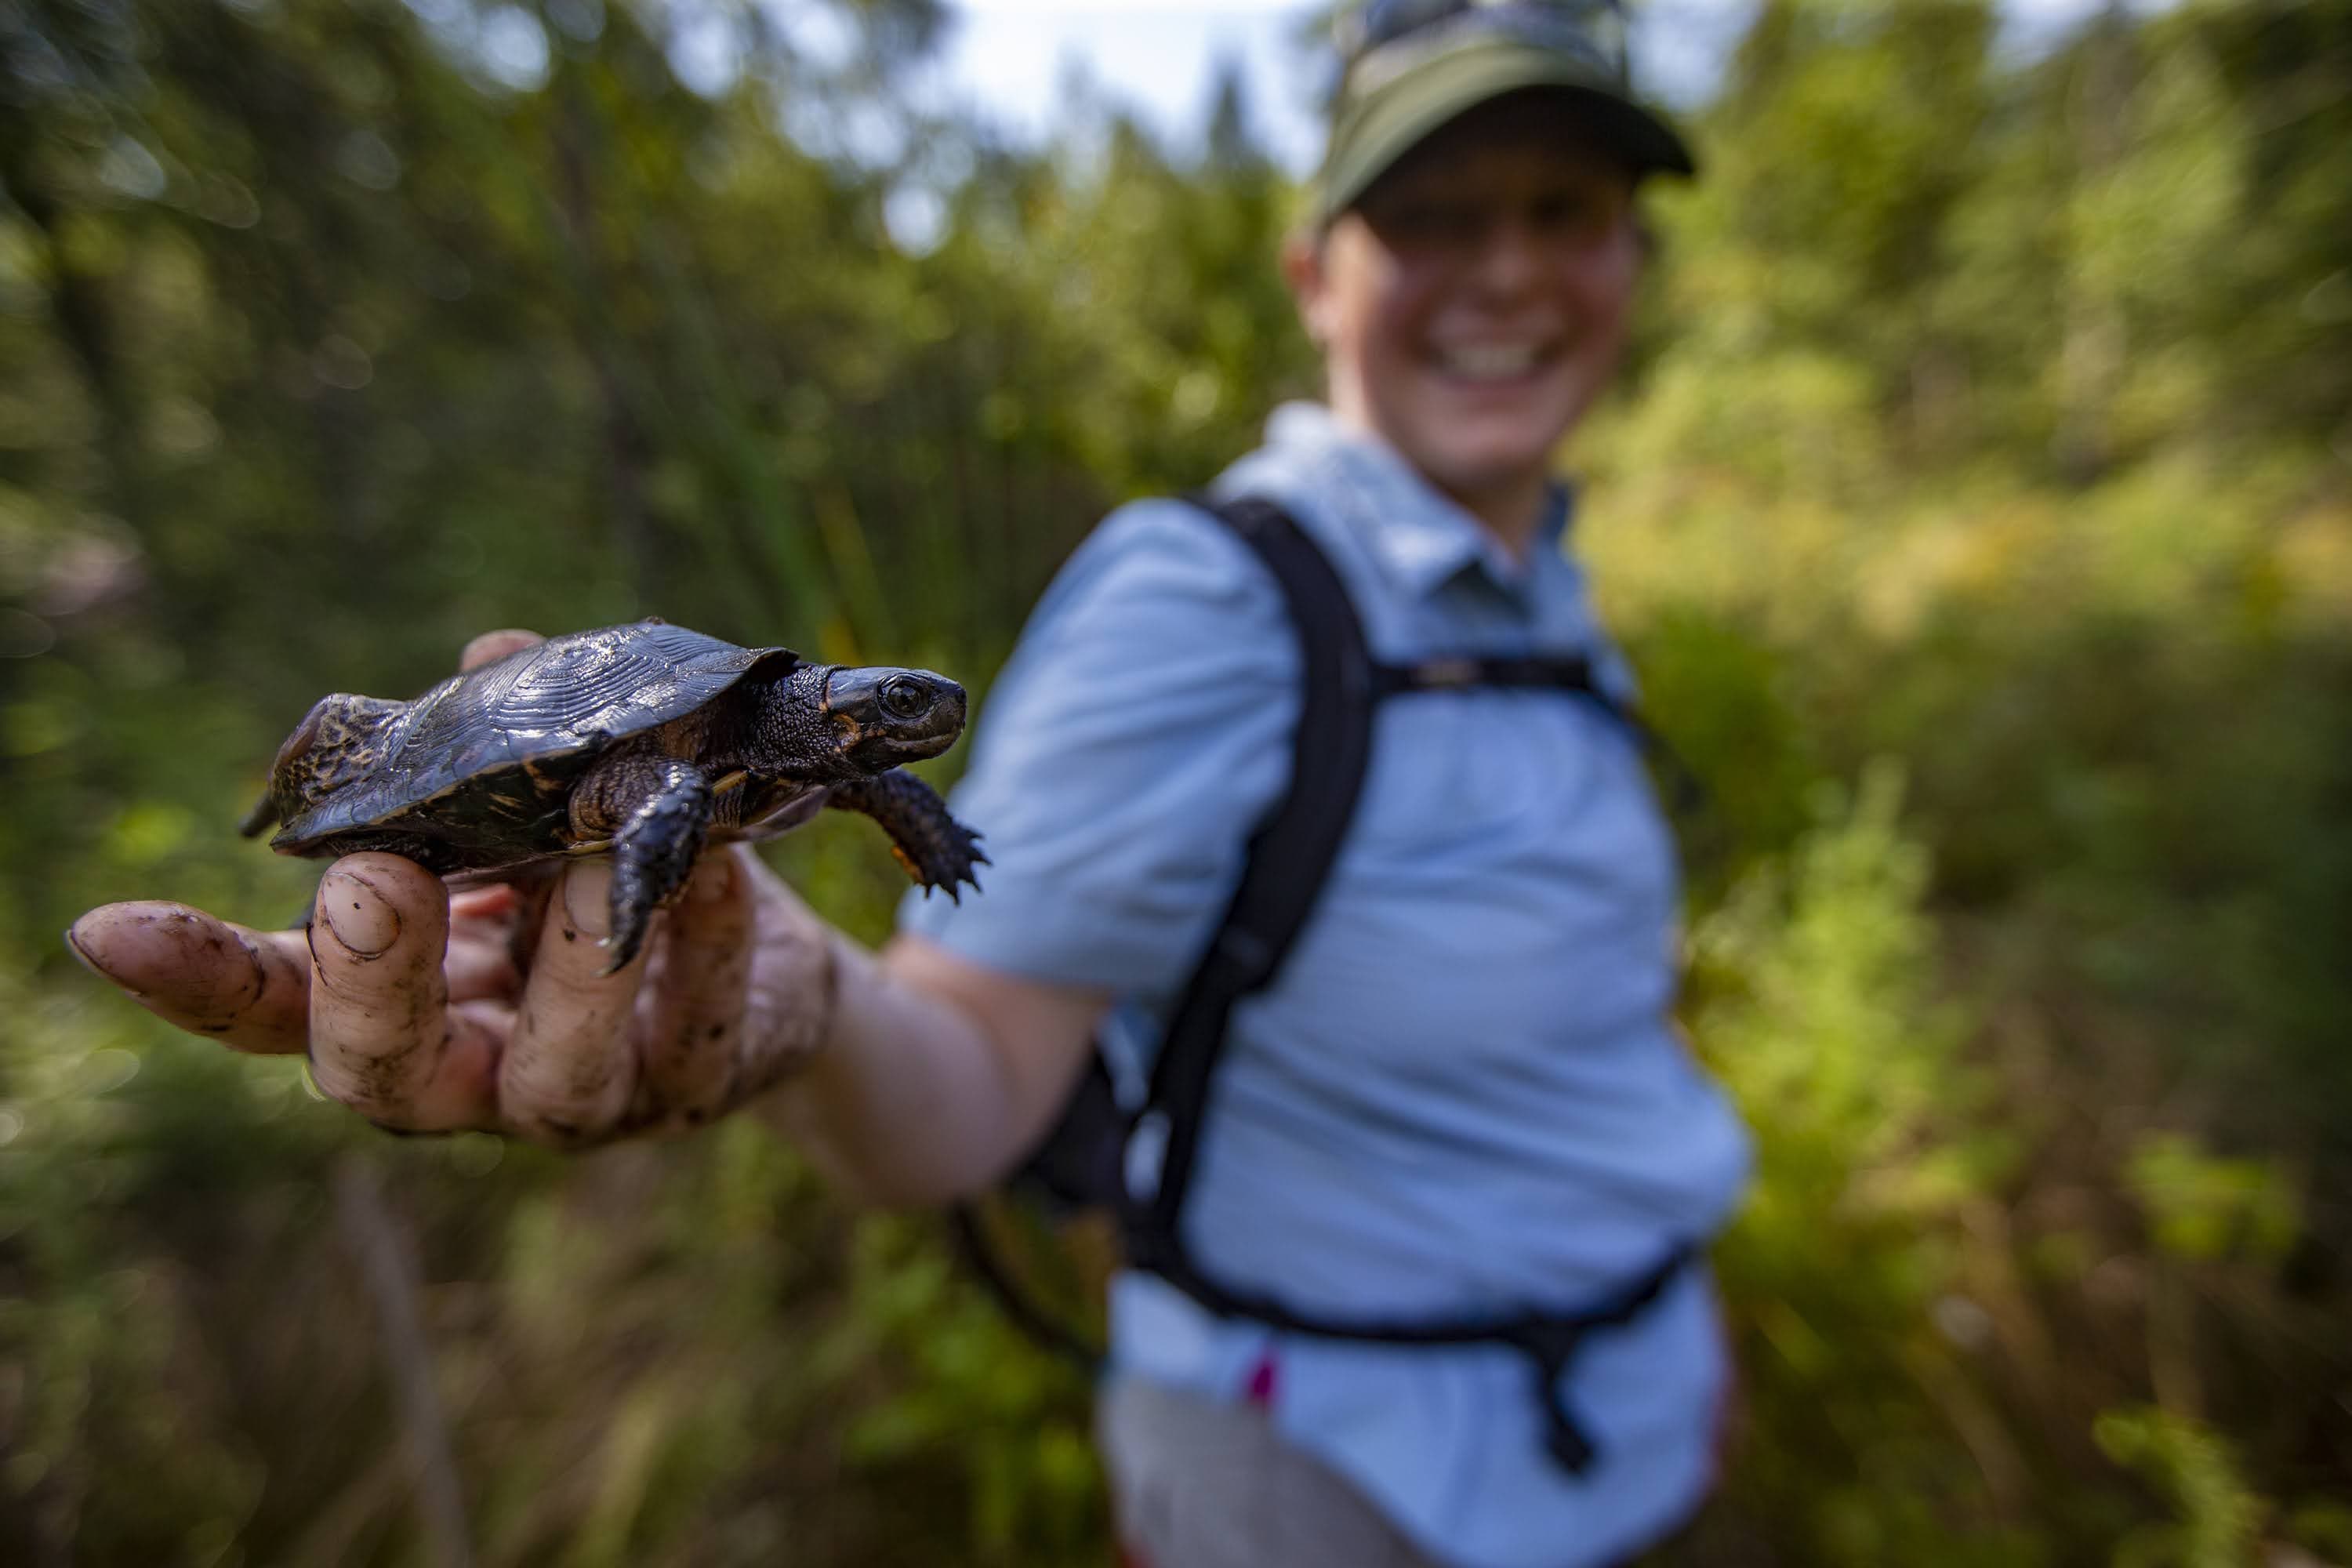 Angela Sirois-Pitel, stewardship manager for The Nature Conservancy, holds a male bog turtle she pulled out from beneath a hummock in a wetland area in the Berkshires. (Jesse Costa/WBUR)